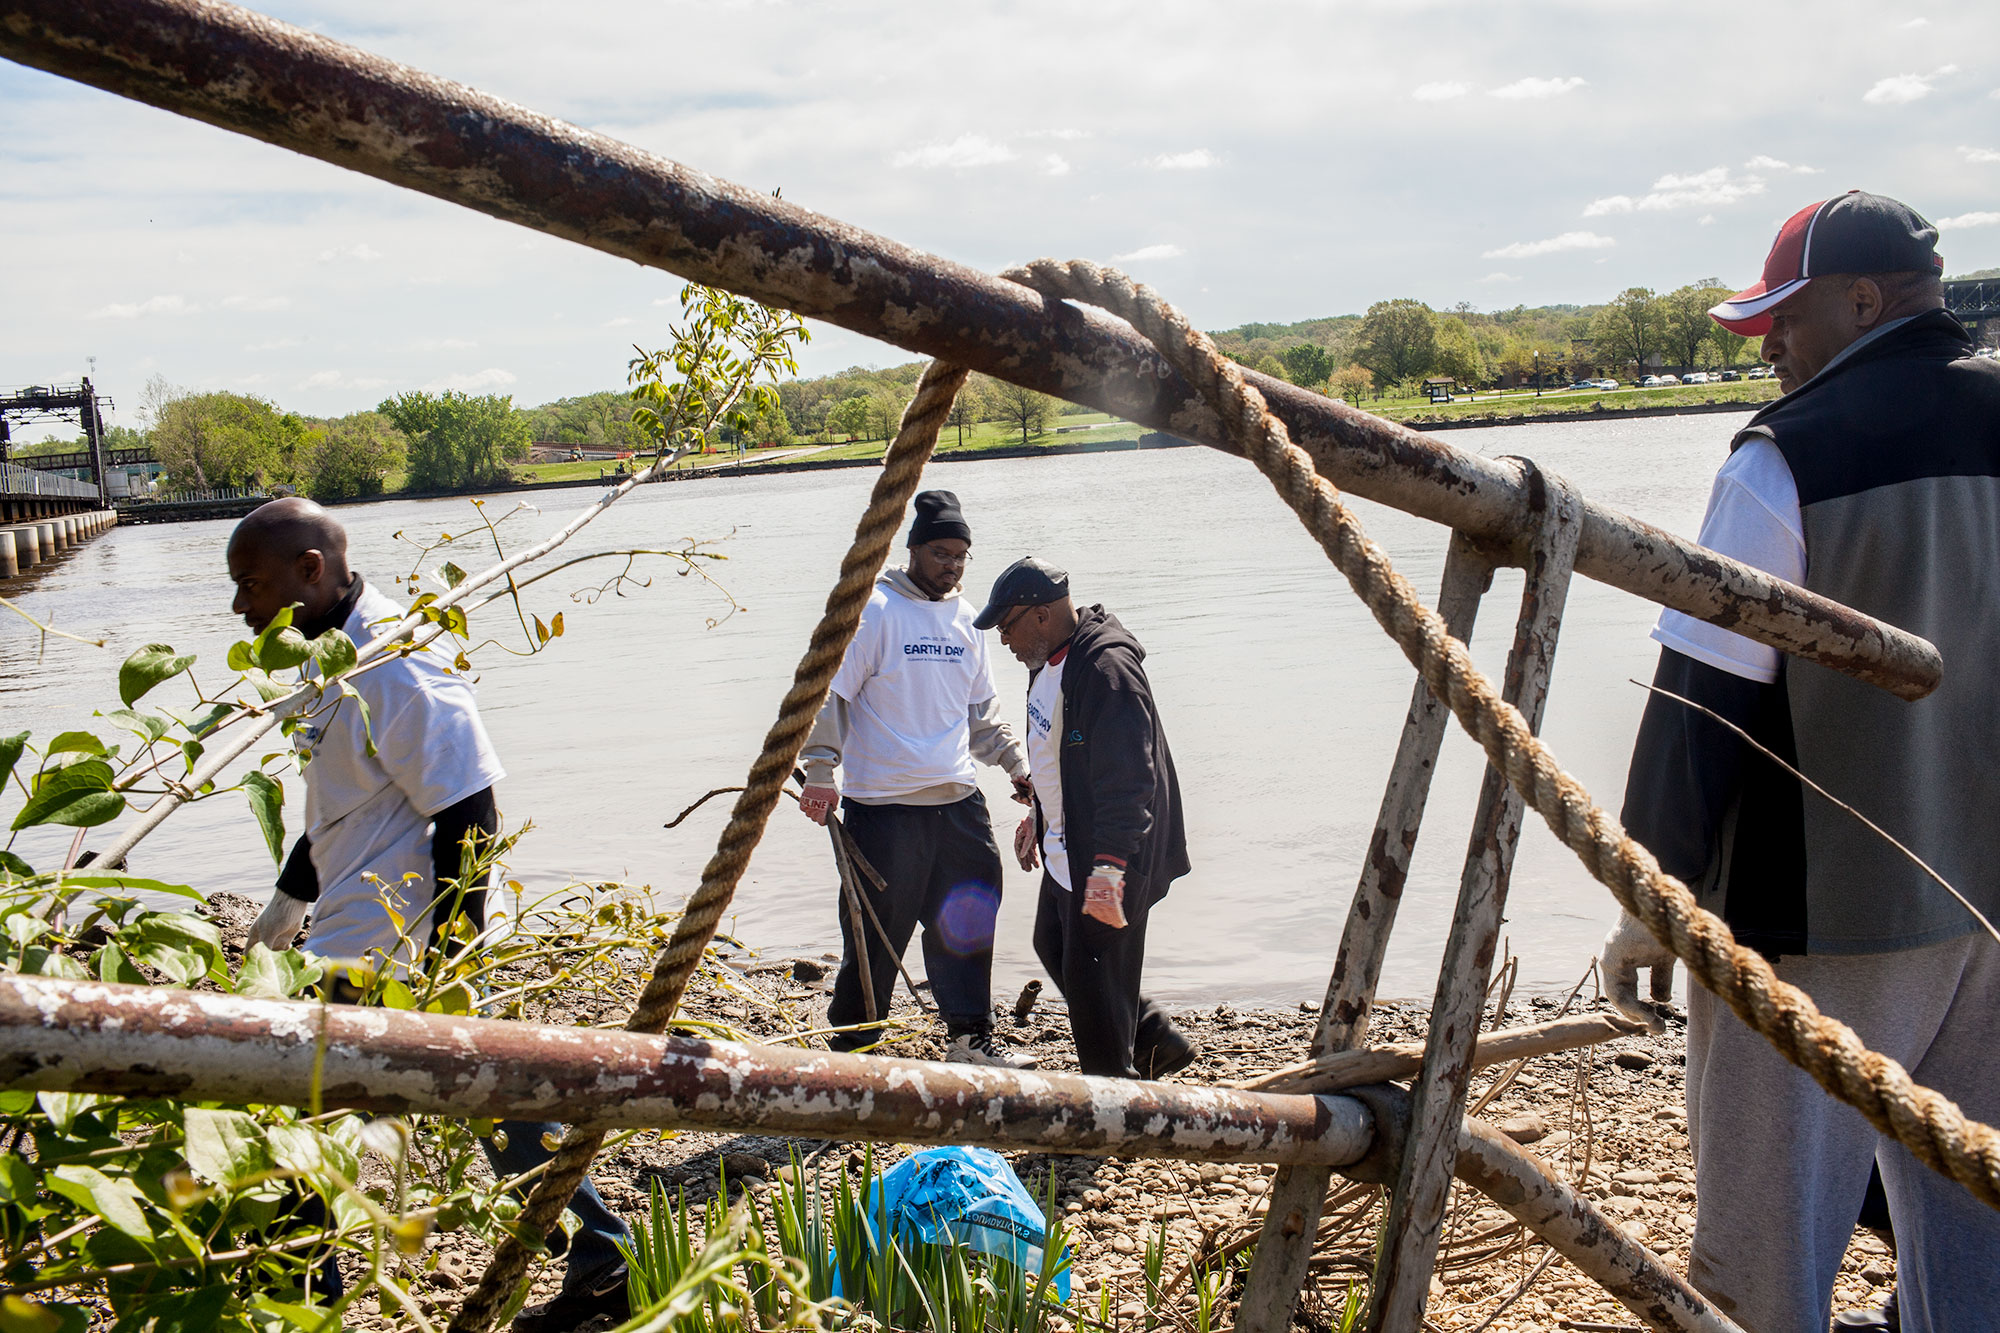  Volunteers from the organization Concerned Black Men and their mentoring program "Just Say Yes" remove debris from the banks of the Anacostia River at Seafarers during the annual Earth Day clean up, now organized by the Anacostia Watershed Society, 